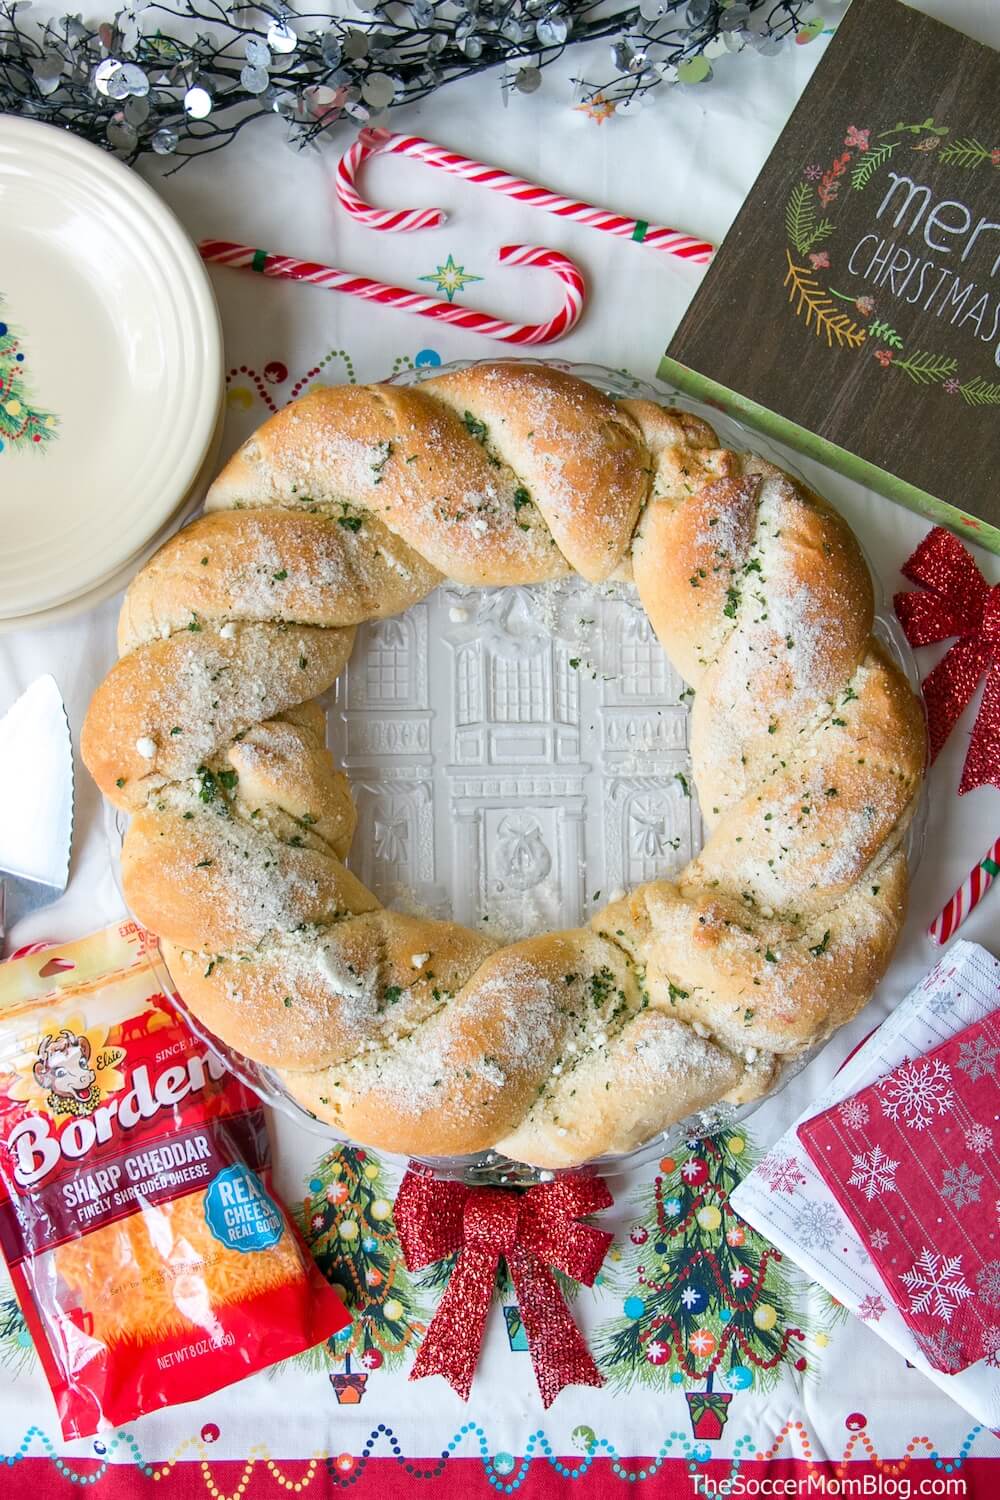 A festive holiday appetizer that's bursting with warm cheesy goodness, this Cheesy Pull Apart Bread Wreath will be the hit of every Christmas party! Sponsored by Borden® Cheese.